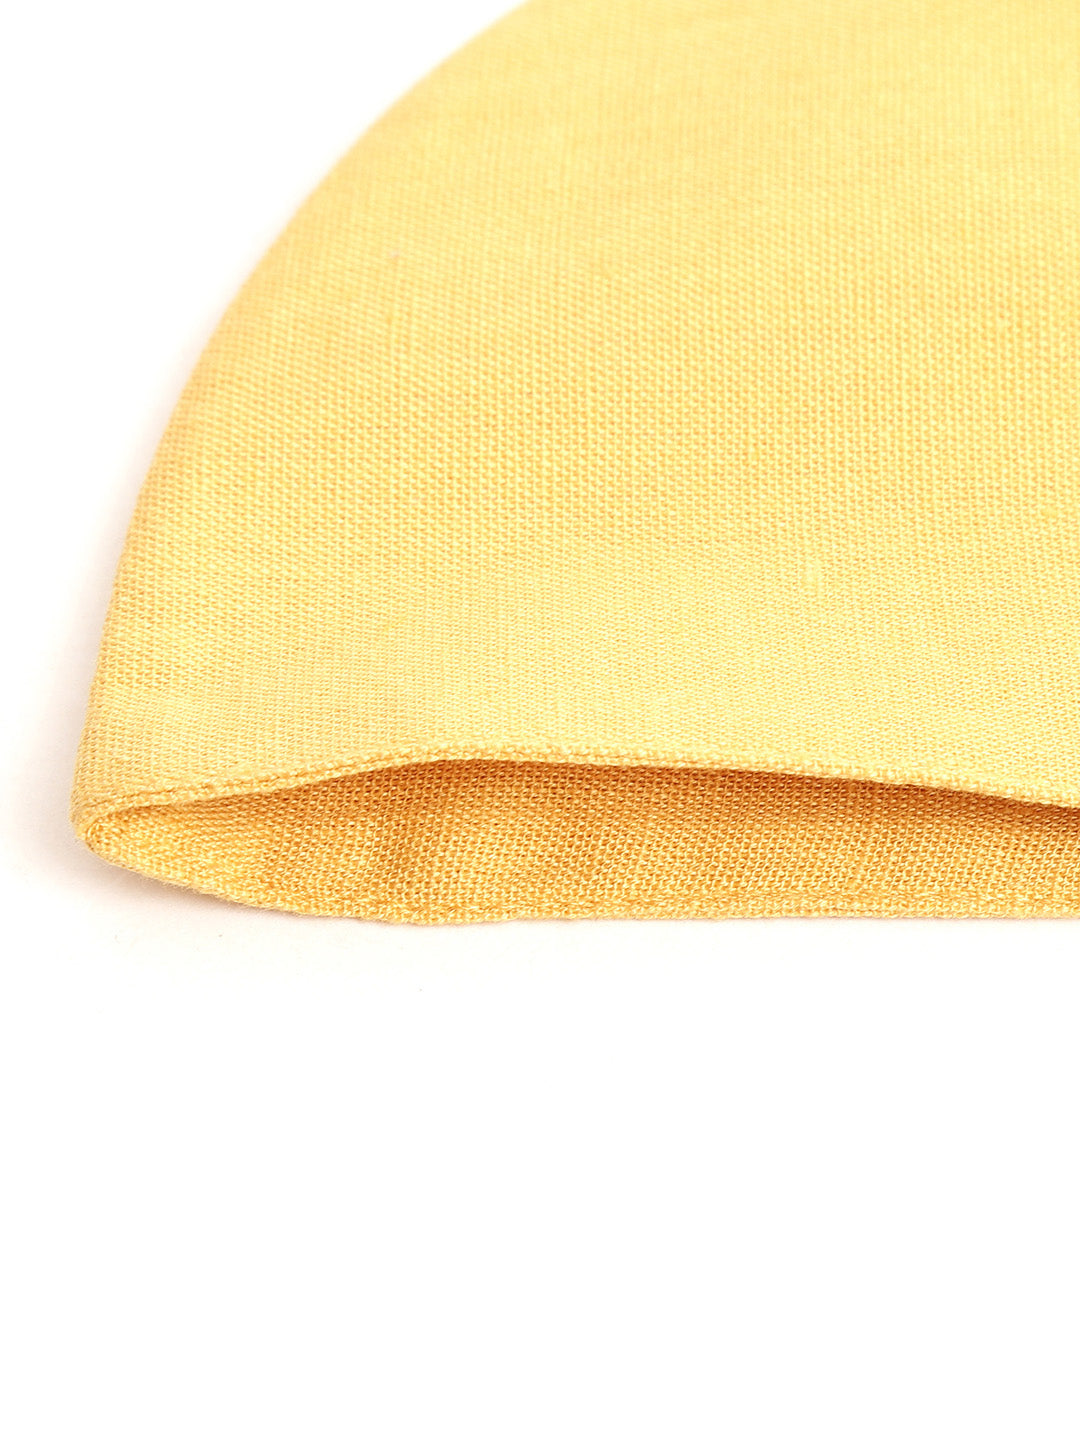 Blueberry yellow Coloured 2 Ply Cotton Reusable Chain Mask